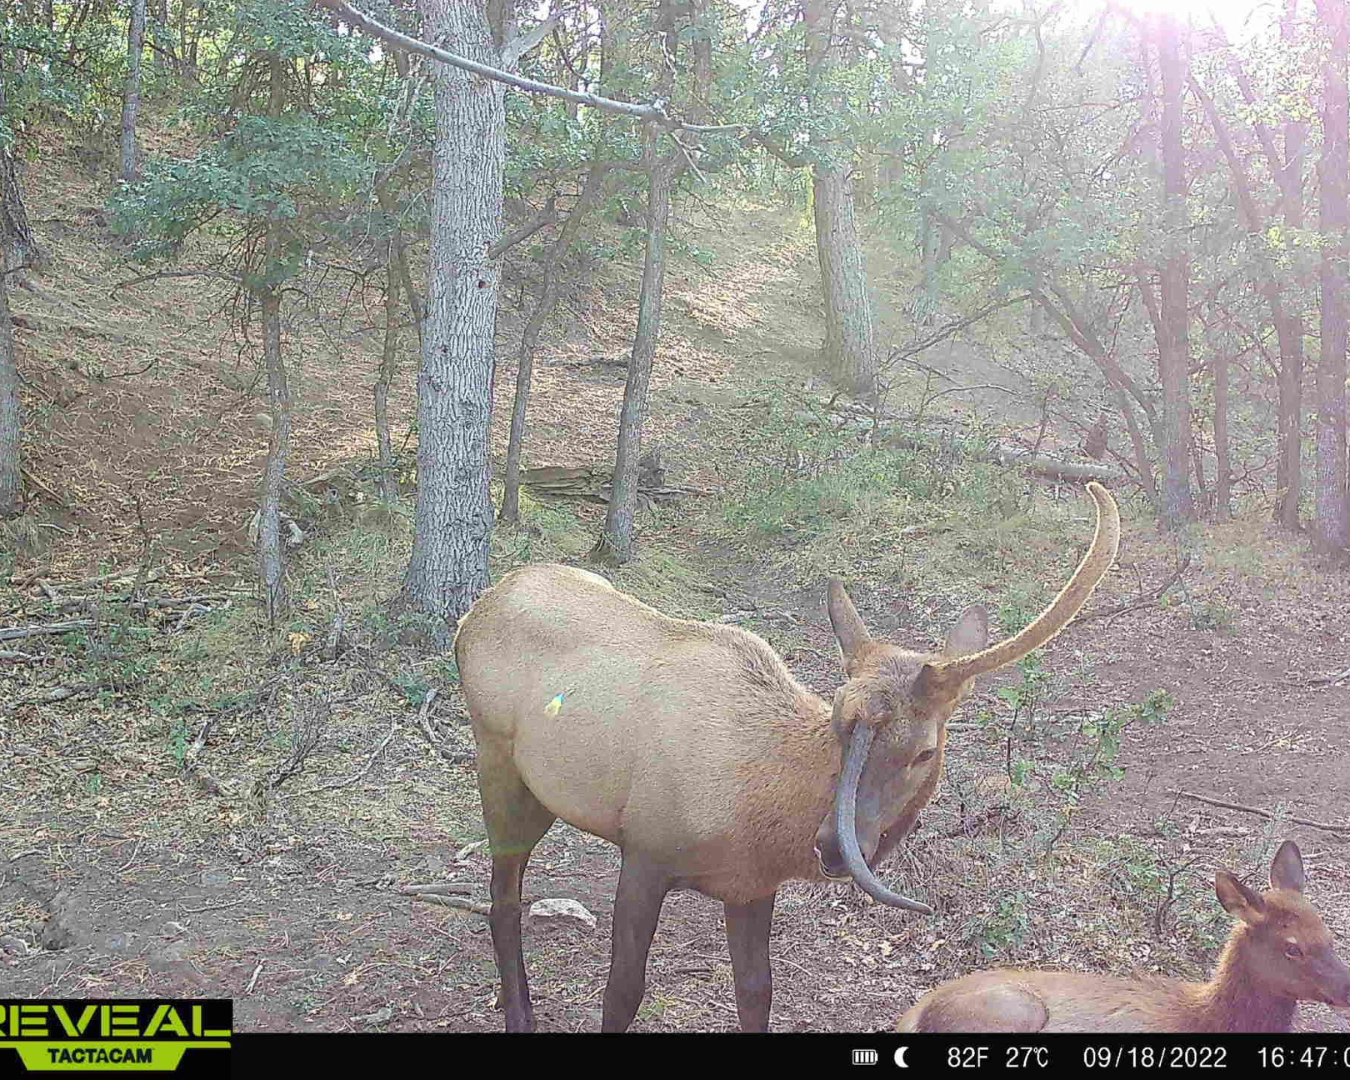 A still from a trail cam showing an elk with one of his antlers growing in the center of his forehead, much like a unicorn.